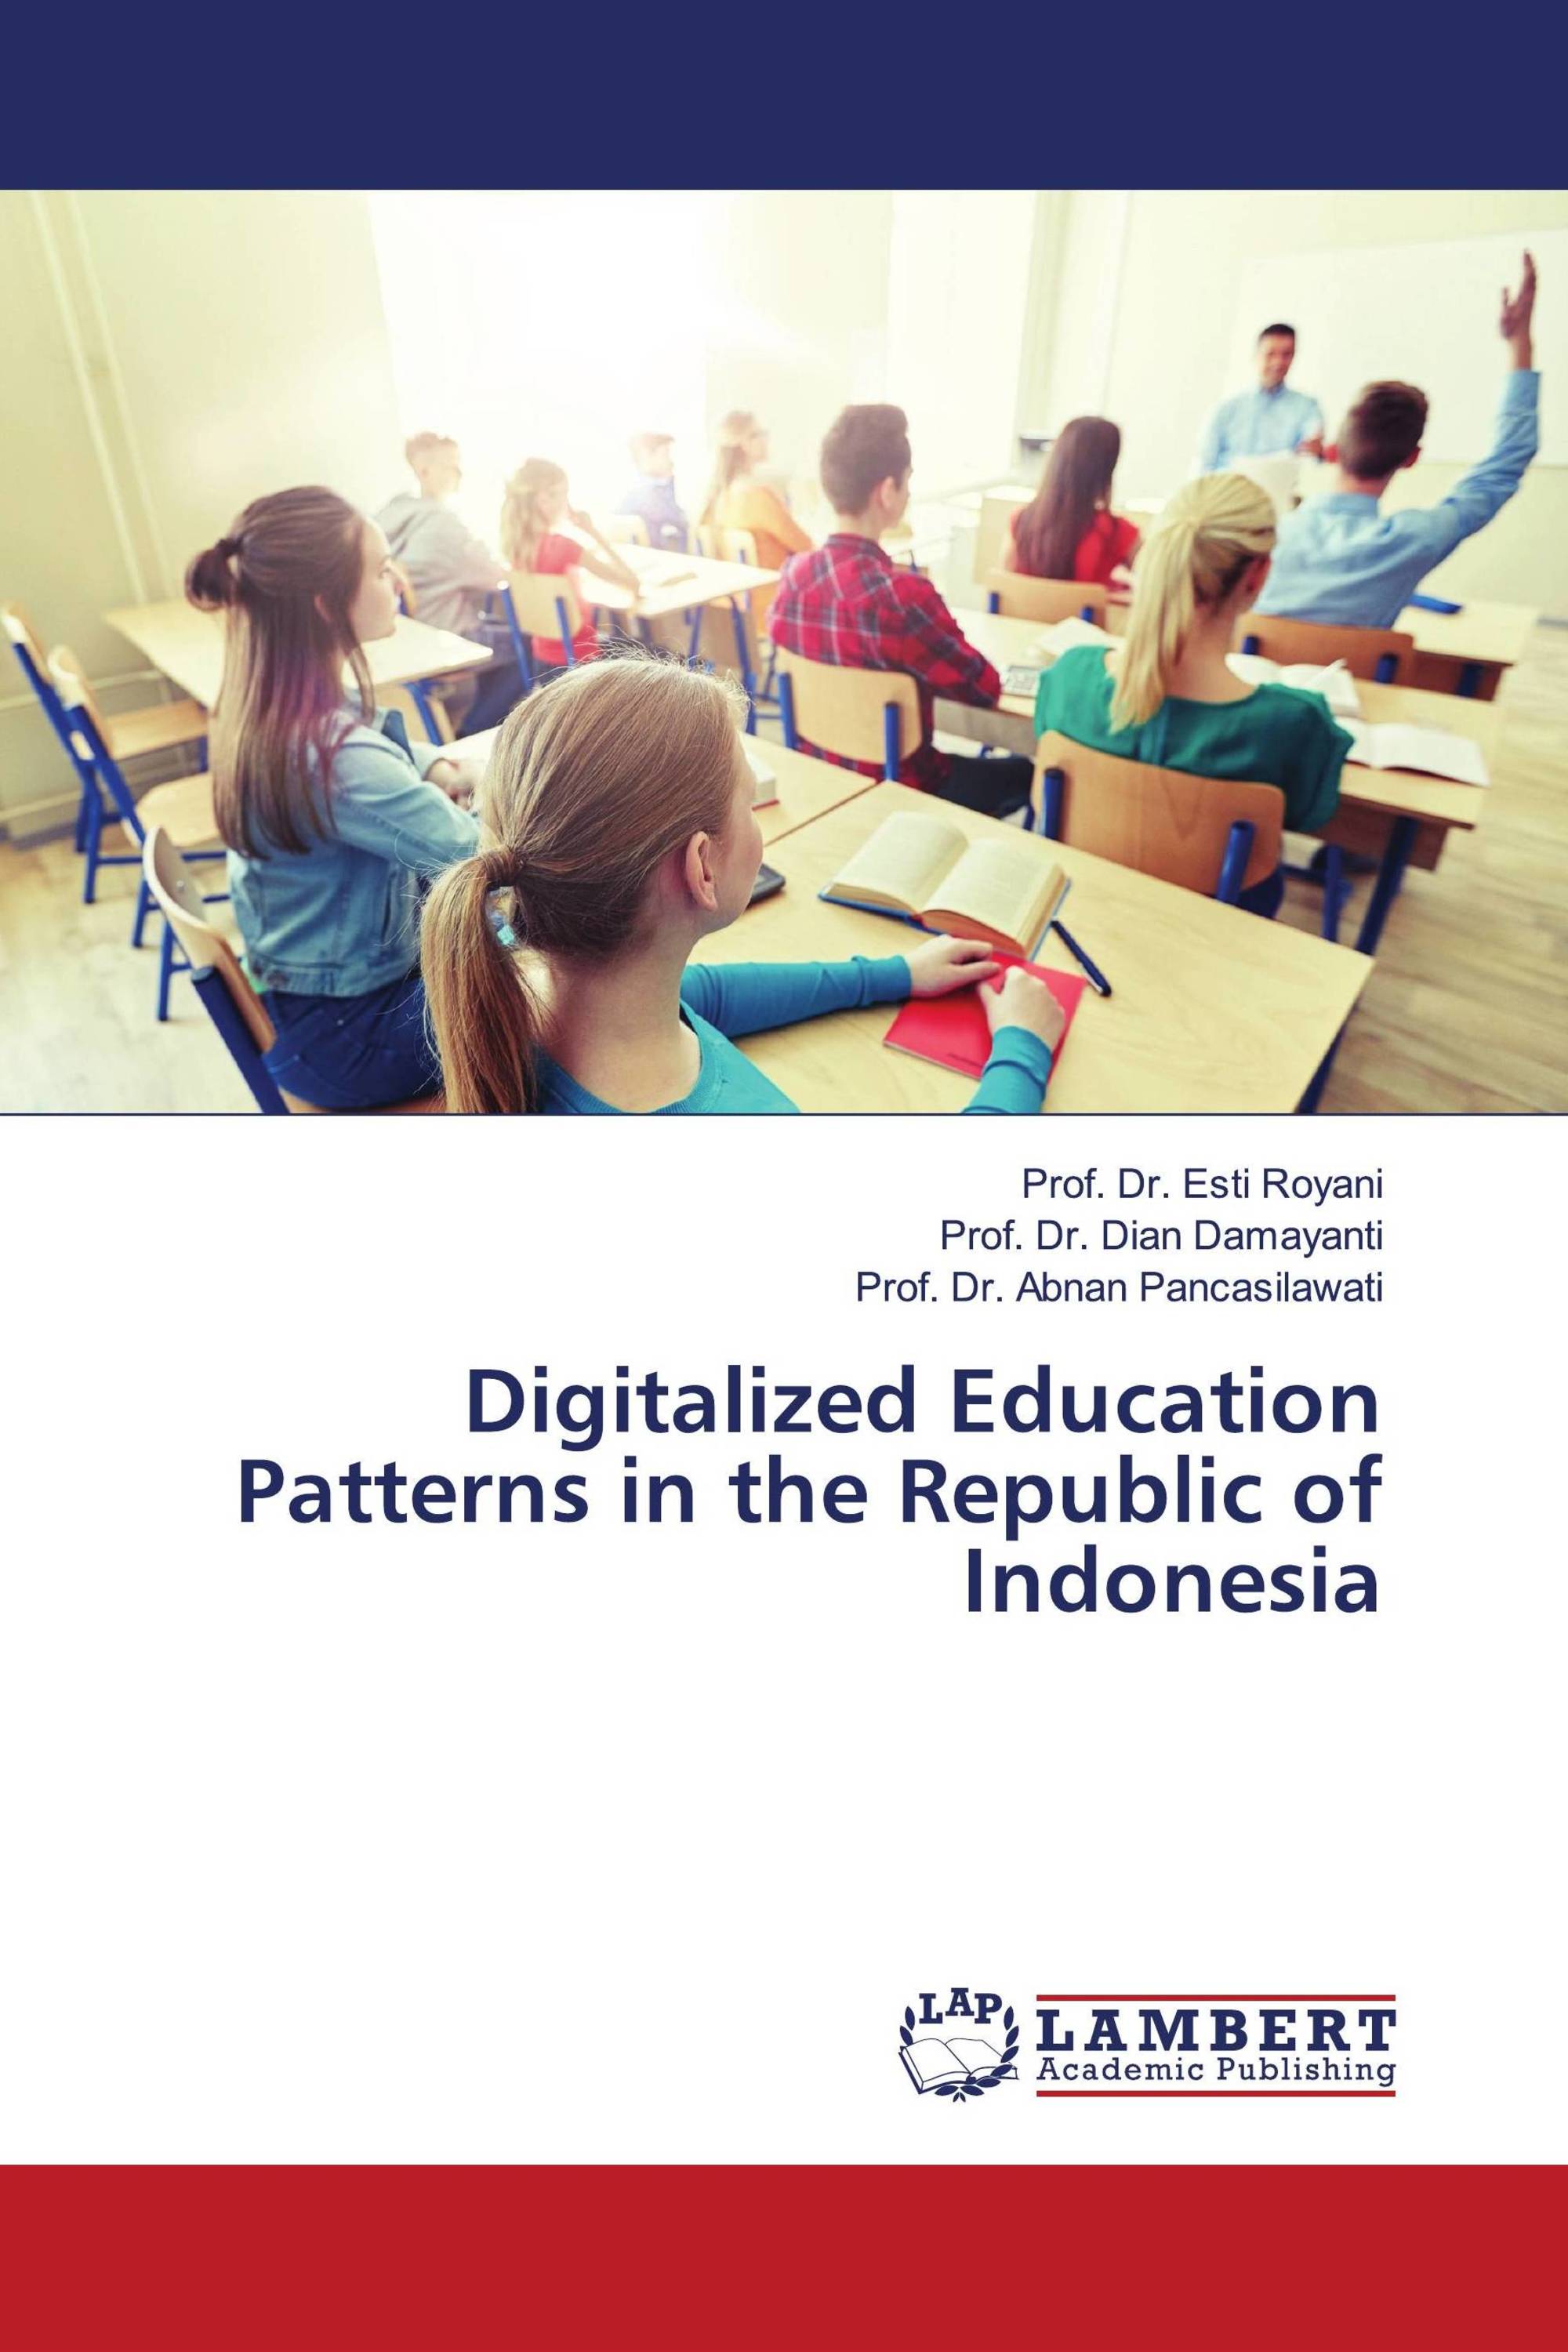 Digitalized Education Patterns in the Republic of Indonesia